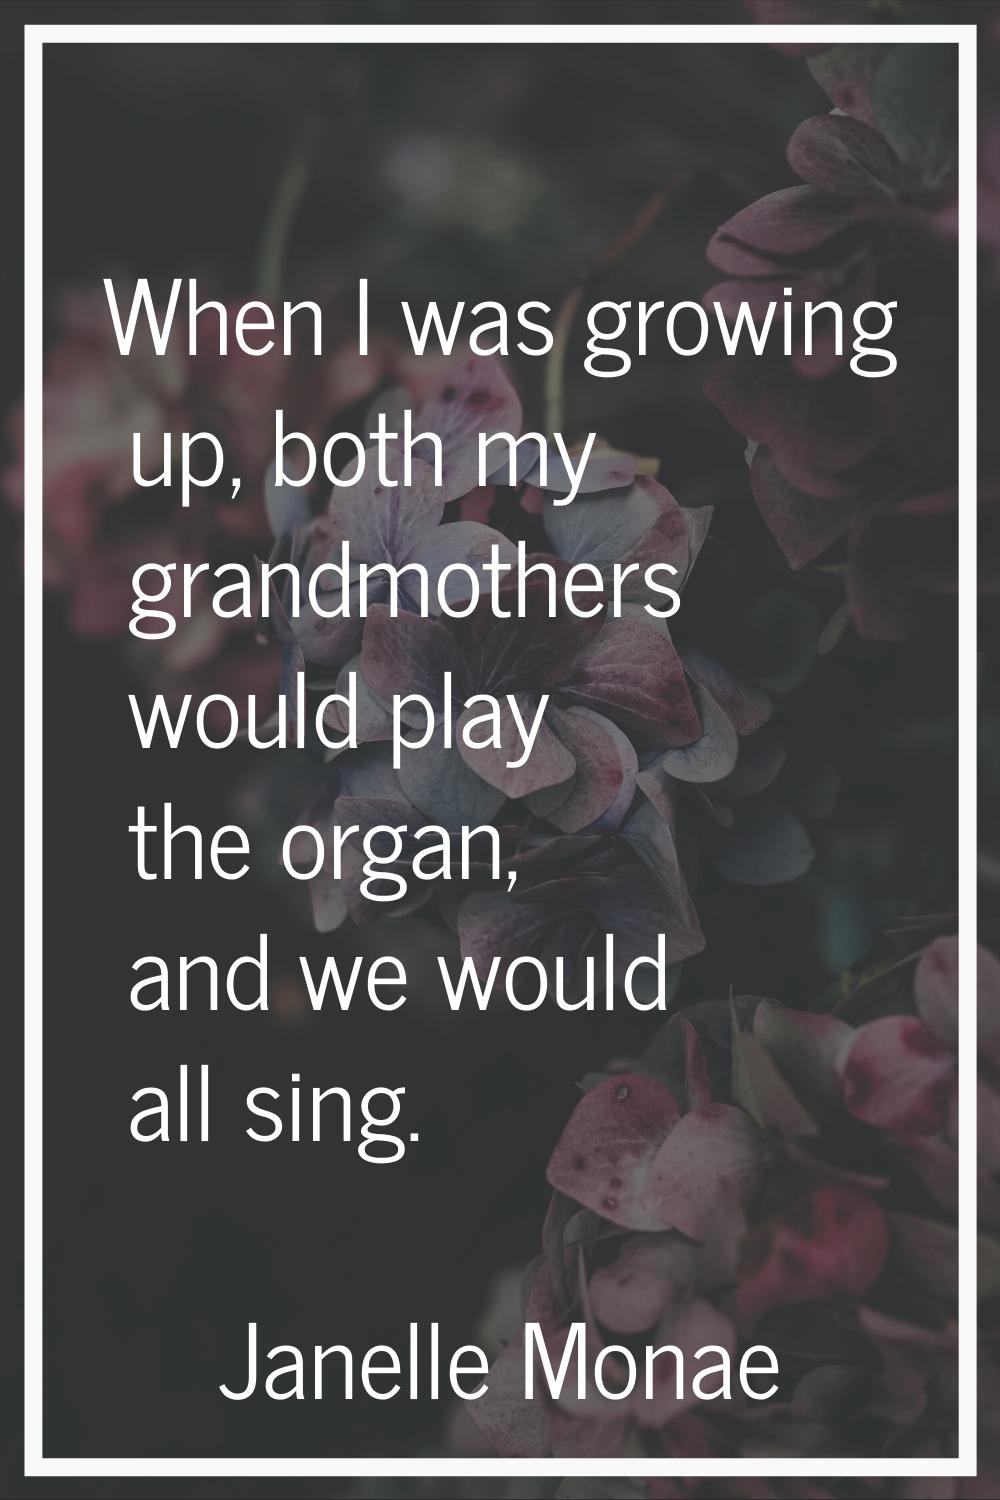 When I was growing up, both my grandmothers would play the organ, and we would all sing.